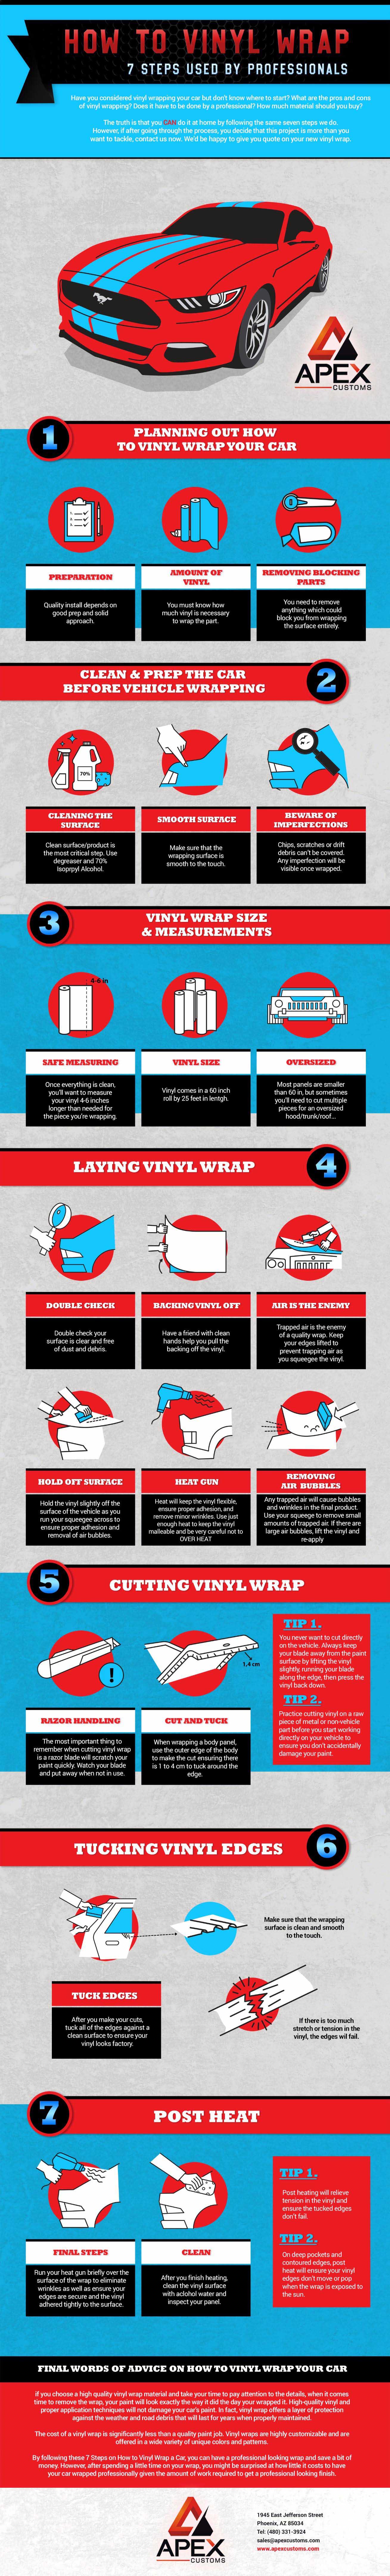 How to Vinyl Wrap: The 7 Steps Used By Professionals